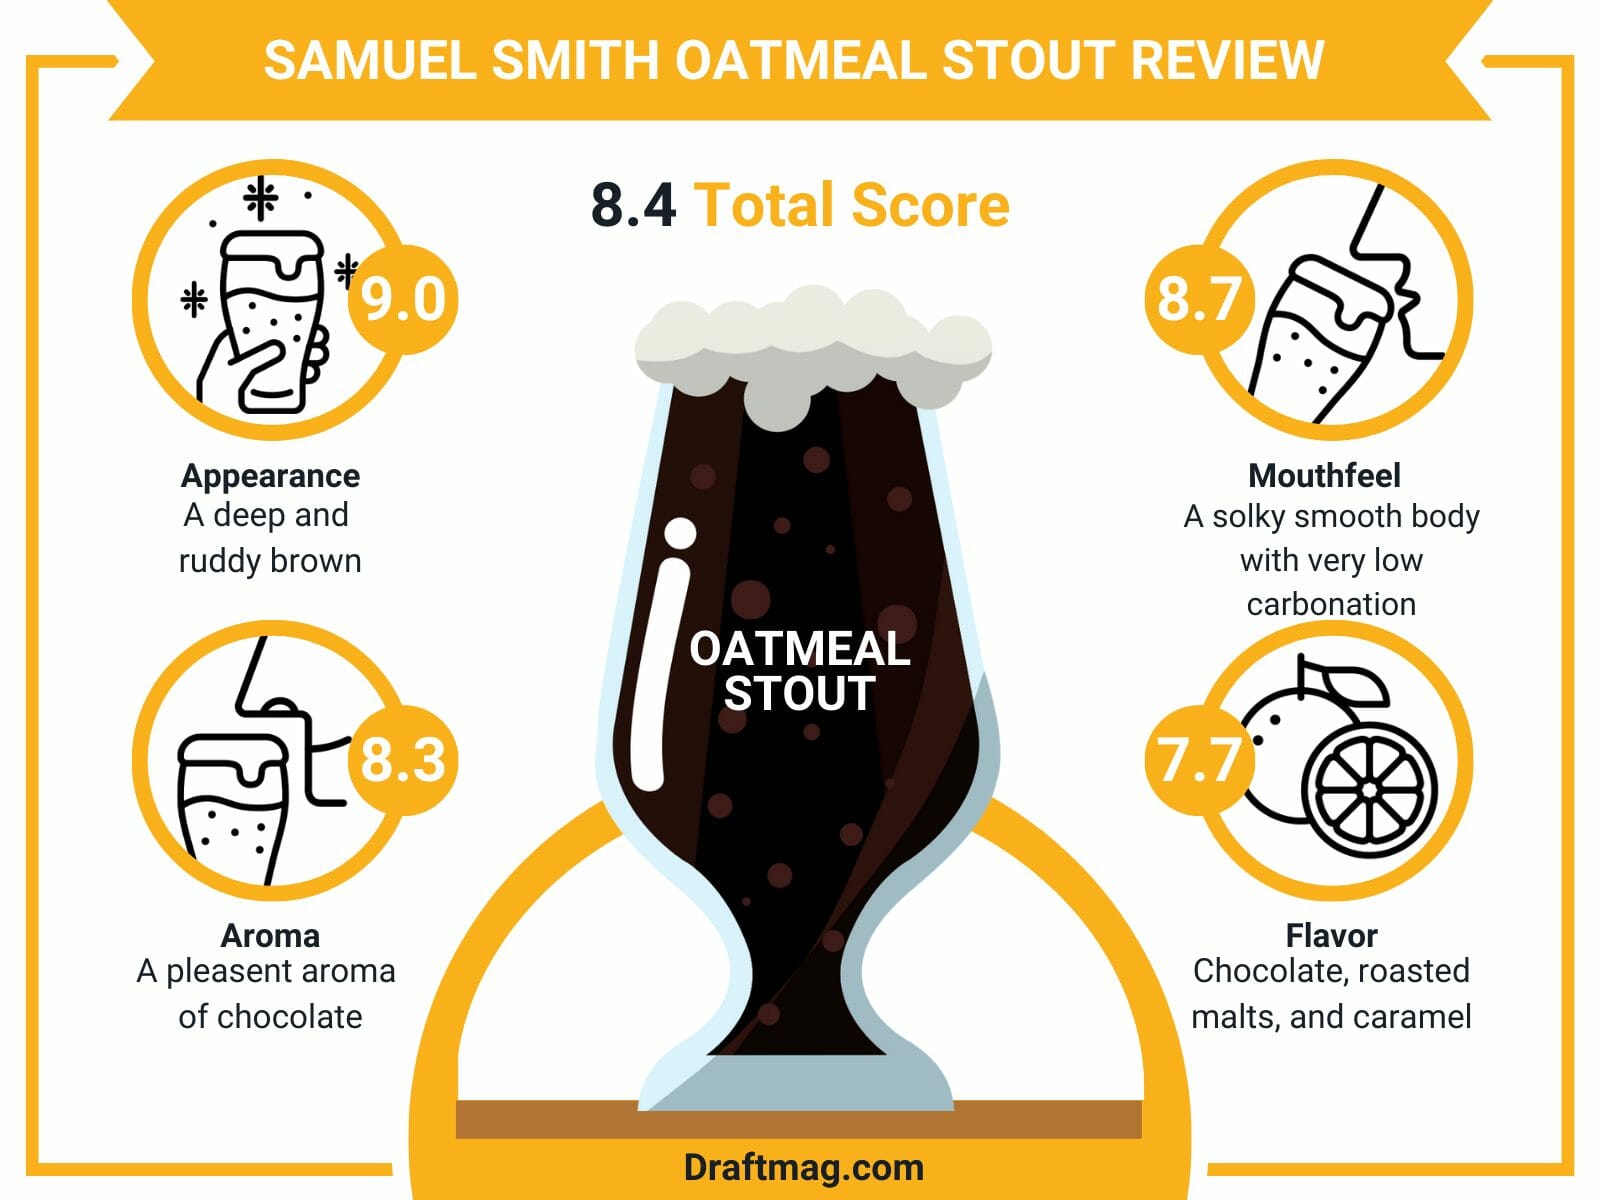 Samuel smith oatmeal stout review infographic